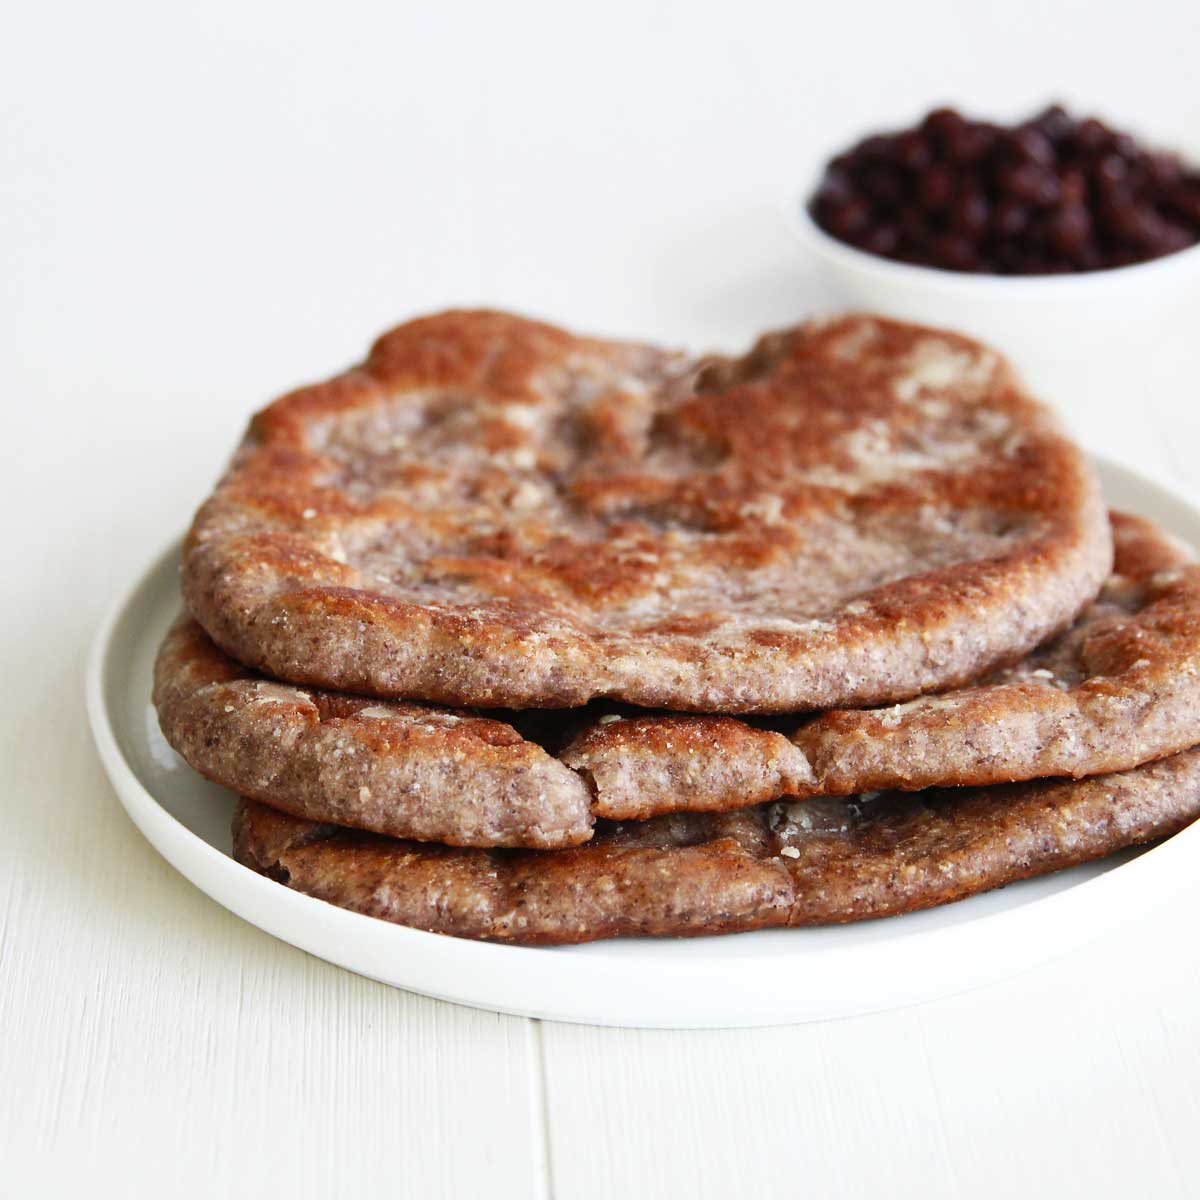 Black Bean Naan (Lower Carb Flatbread Made with Canned Black Beans)
